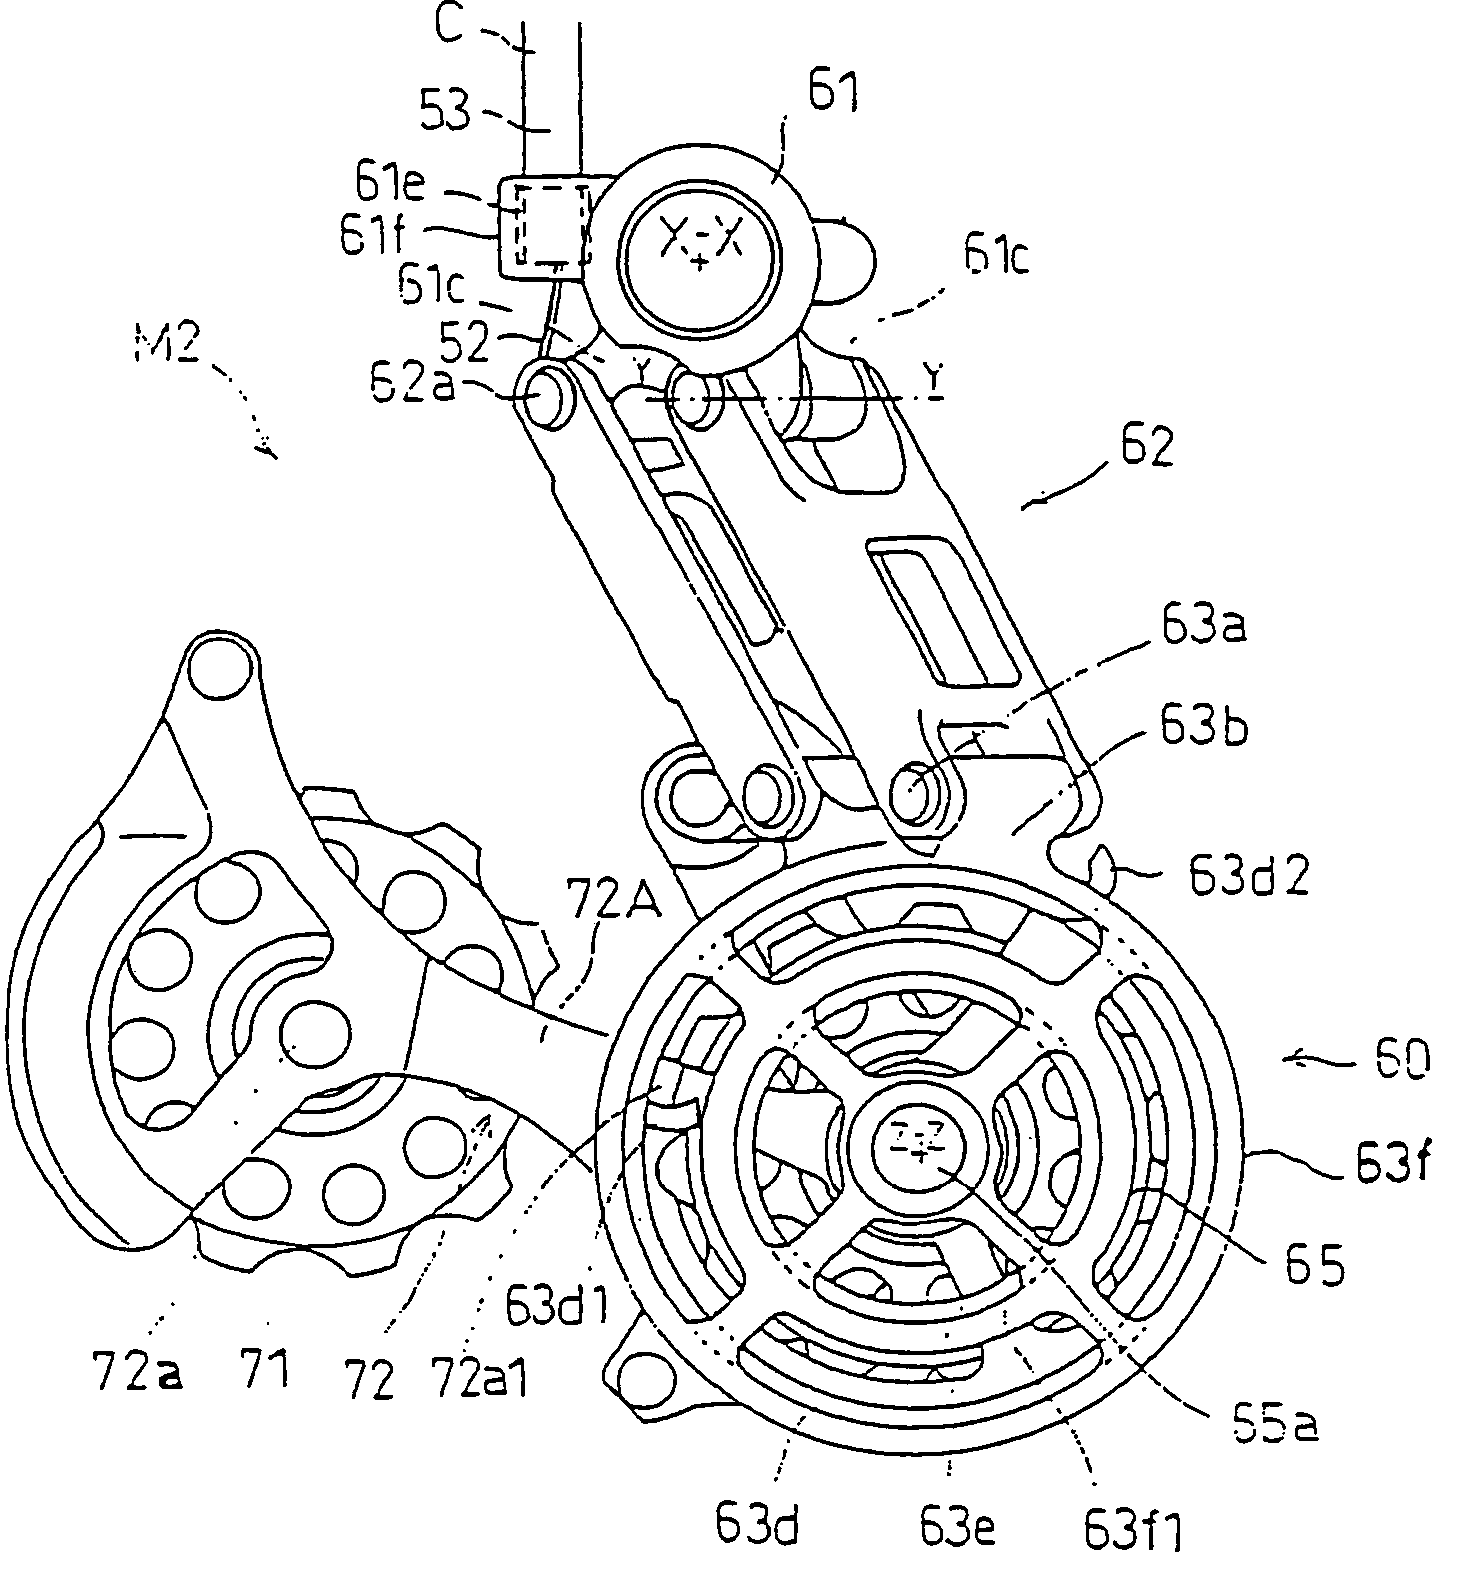 Structure of transmission for bicycle